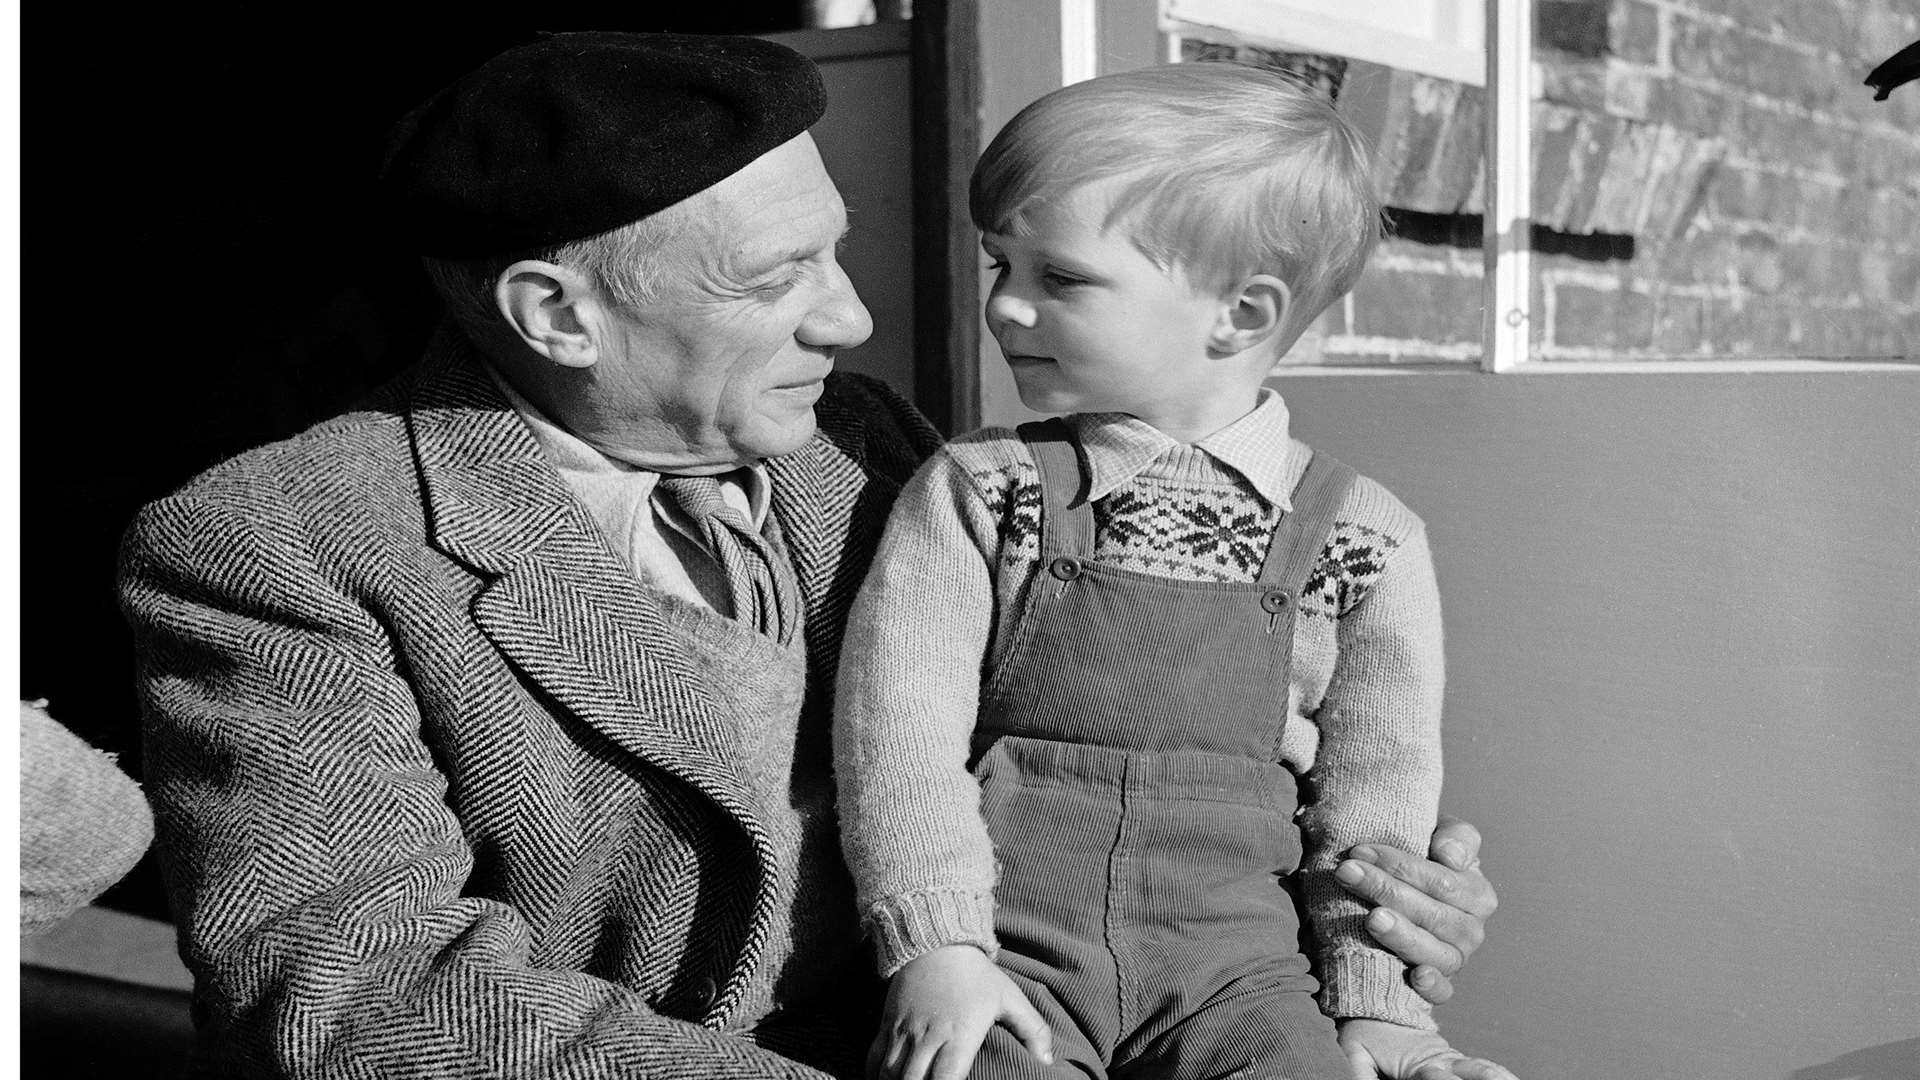 Pablo Picasso, pictured with young friend, Antony Penrose, in 1950